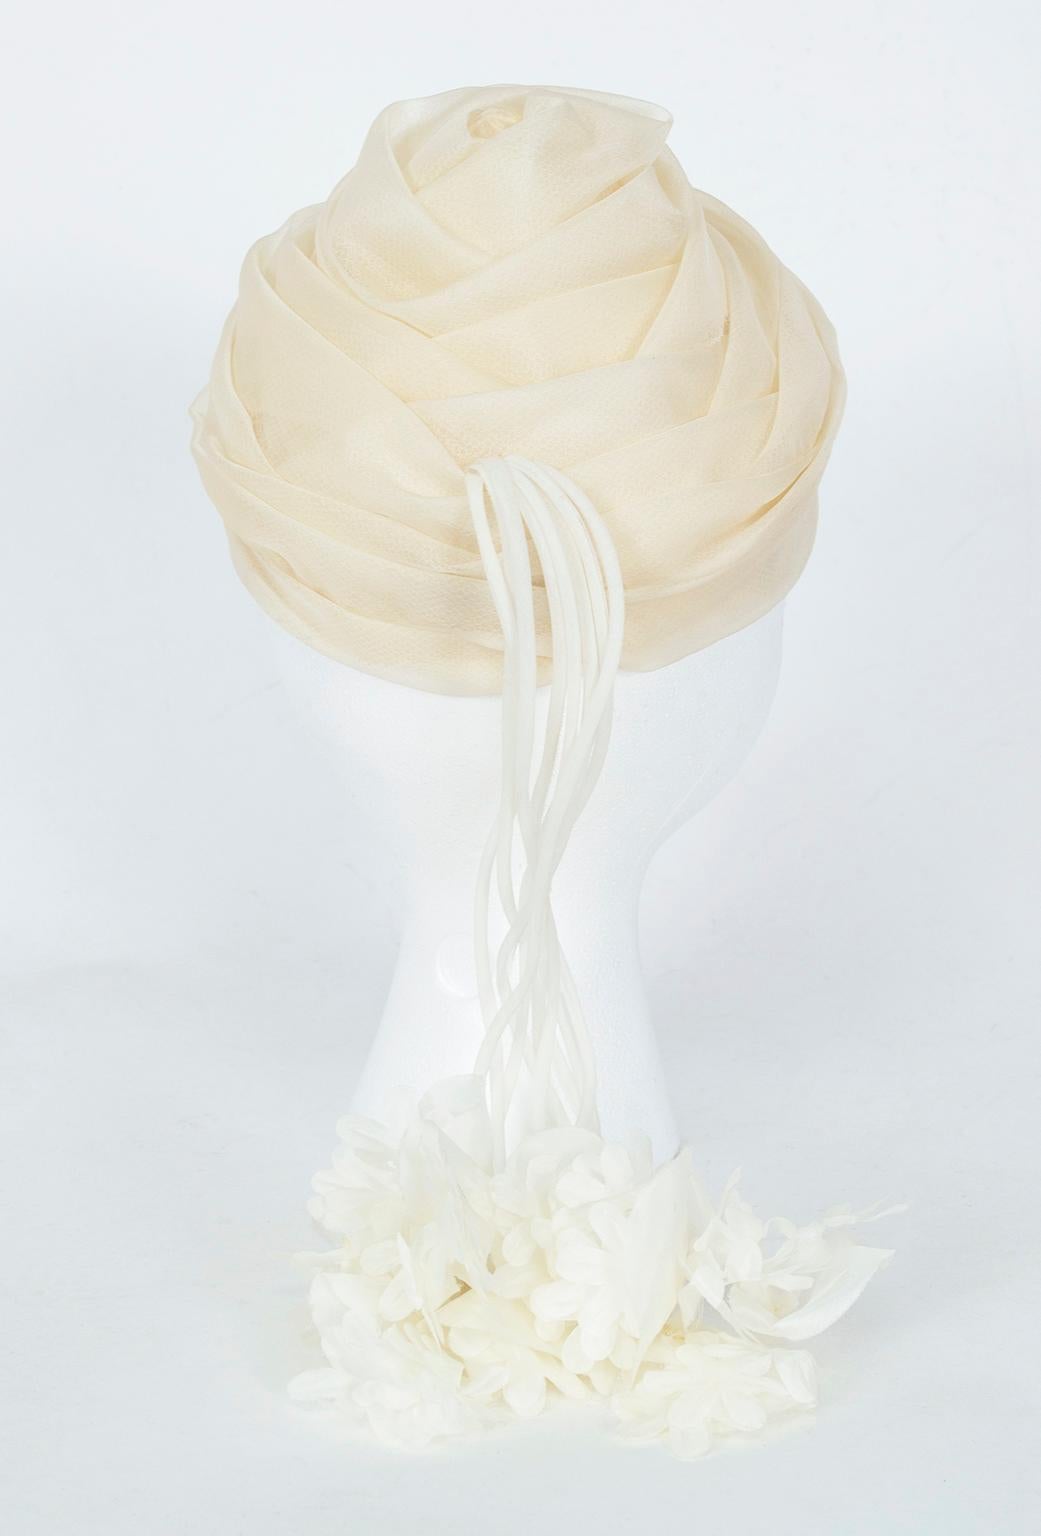 Gray Ivory Chiffon Peaked Wedding Cocktail Twist Cap with Floral Tassels - S-M, 1950s